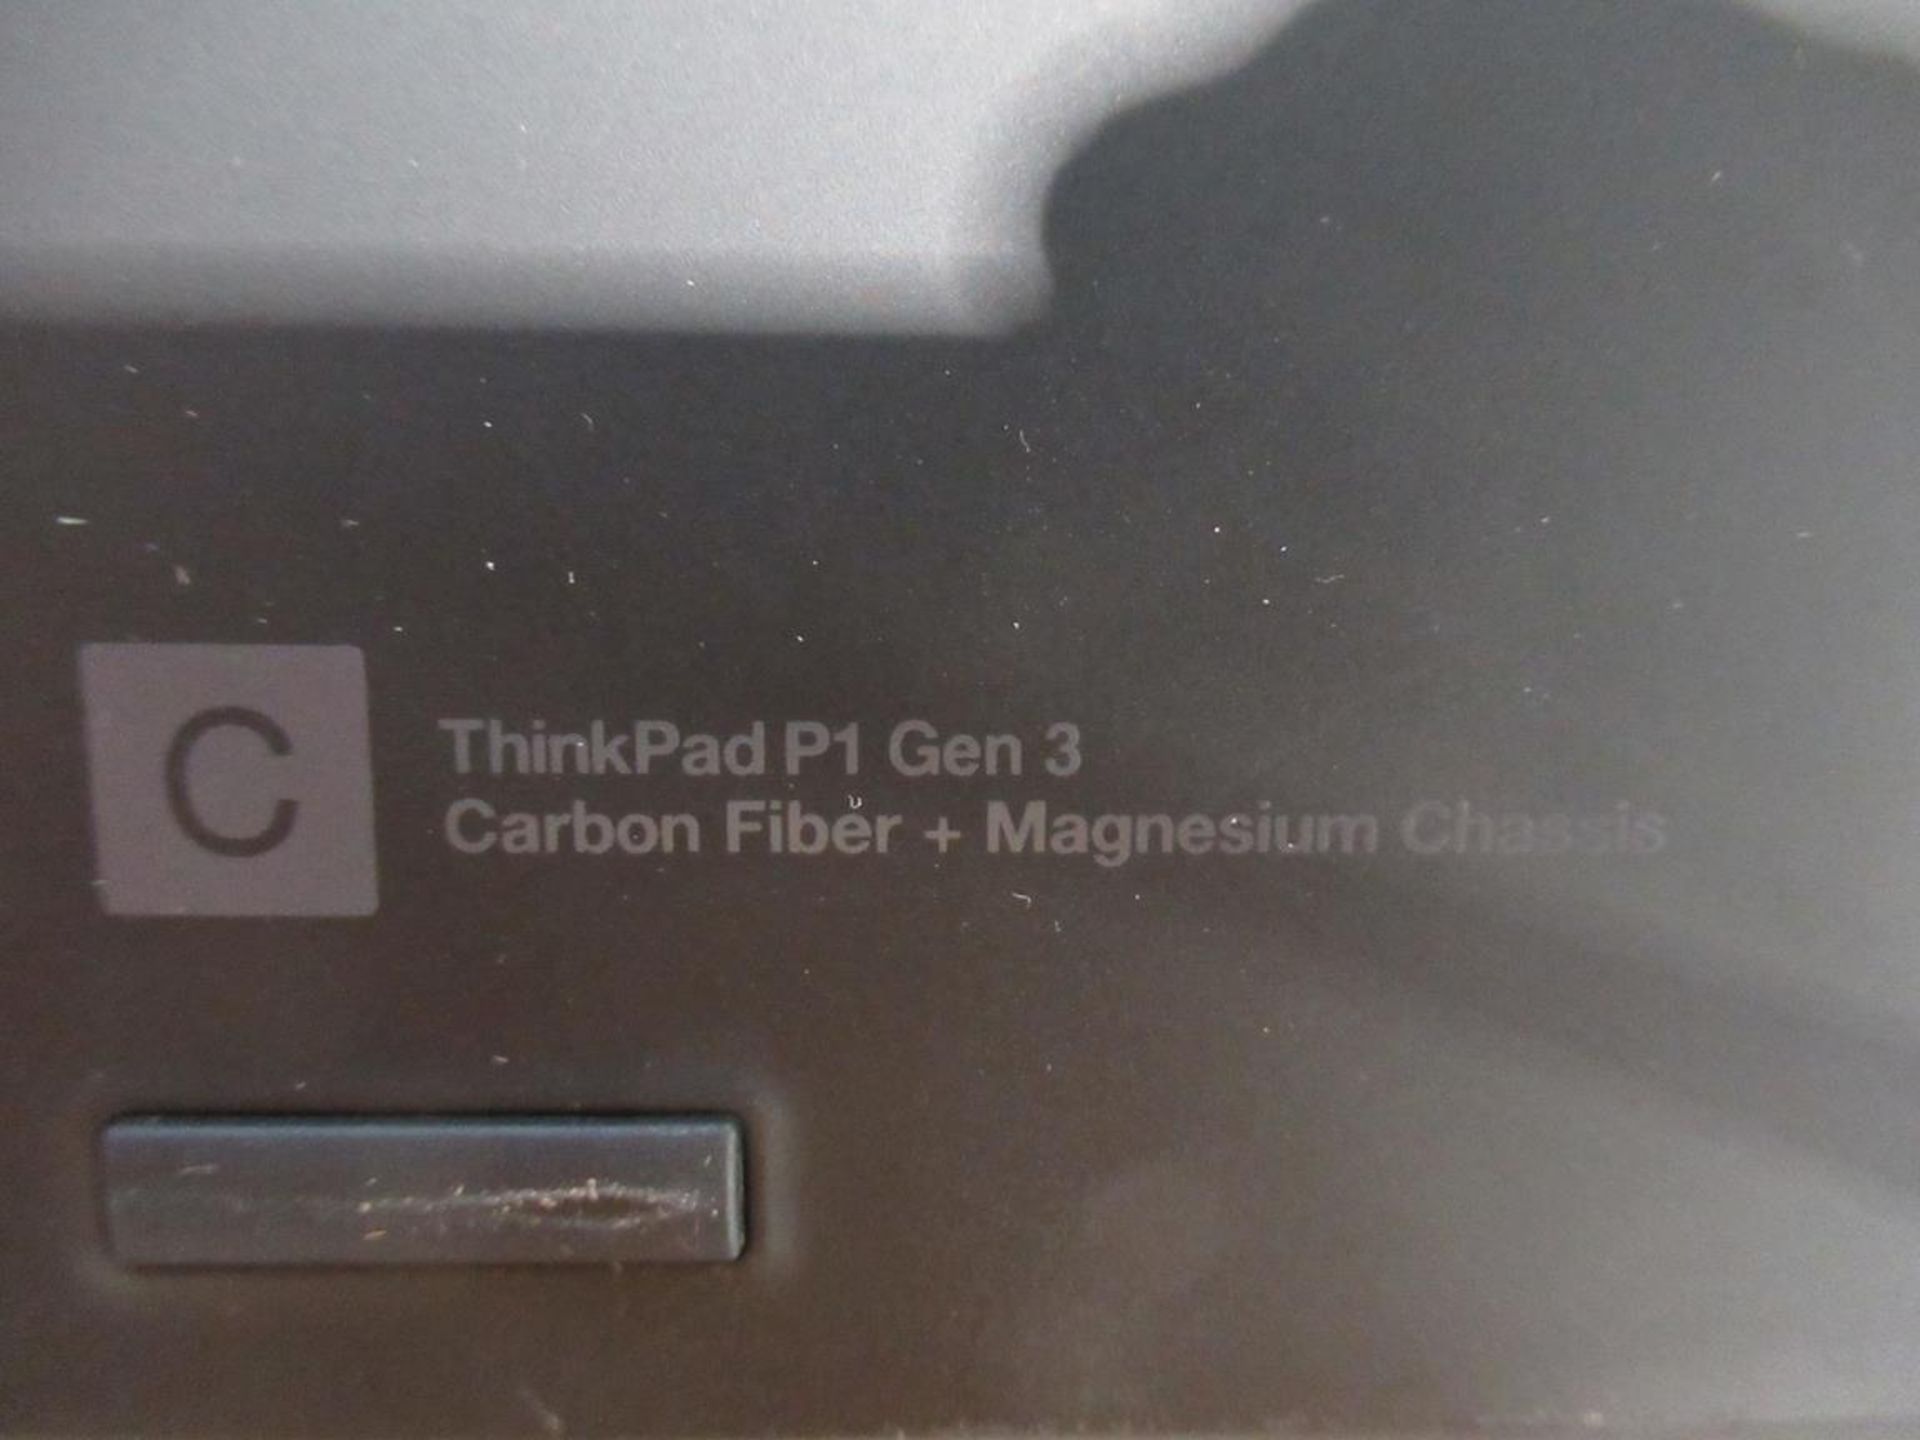 Lenovo, Thinkpad P1 Gen 3 CAD specification (boxed) - Image 4 of 6